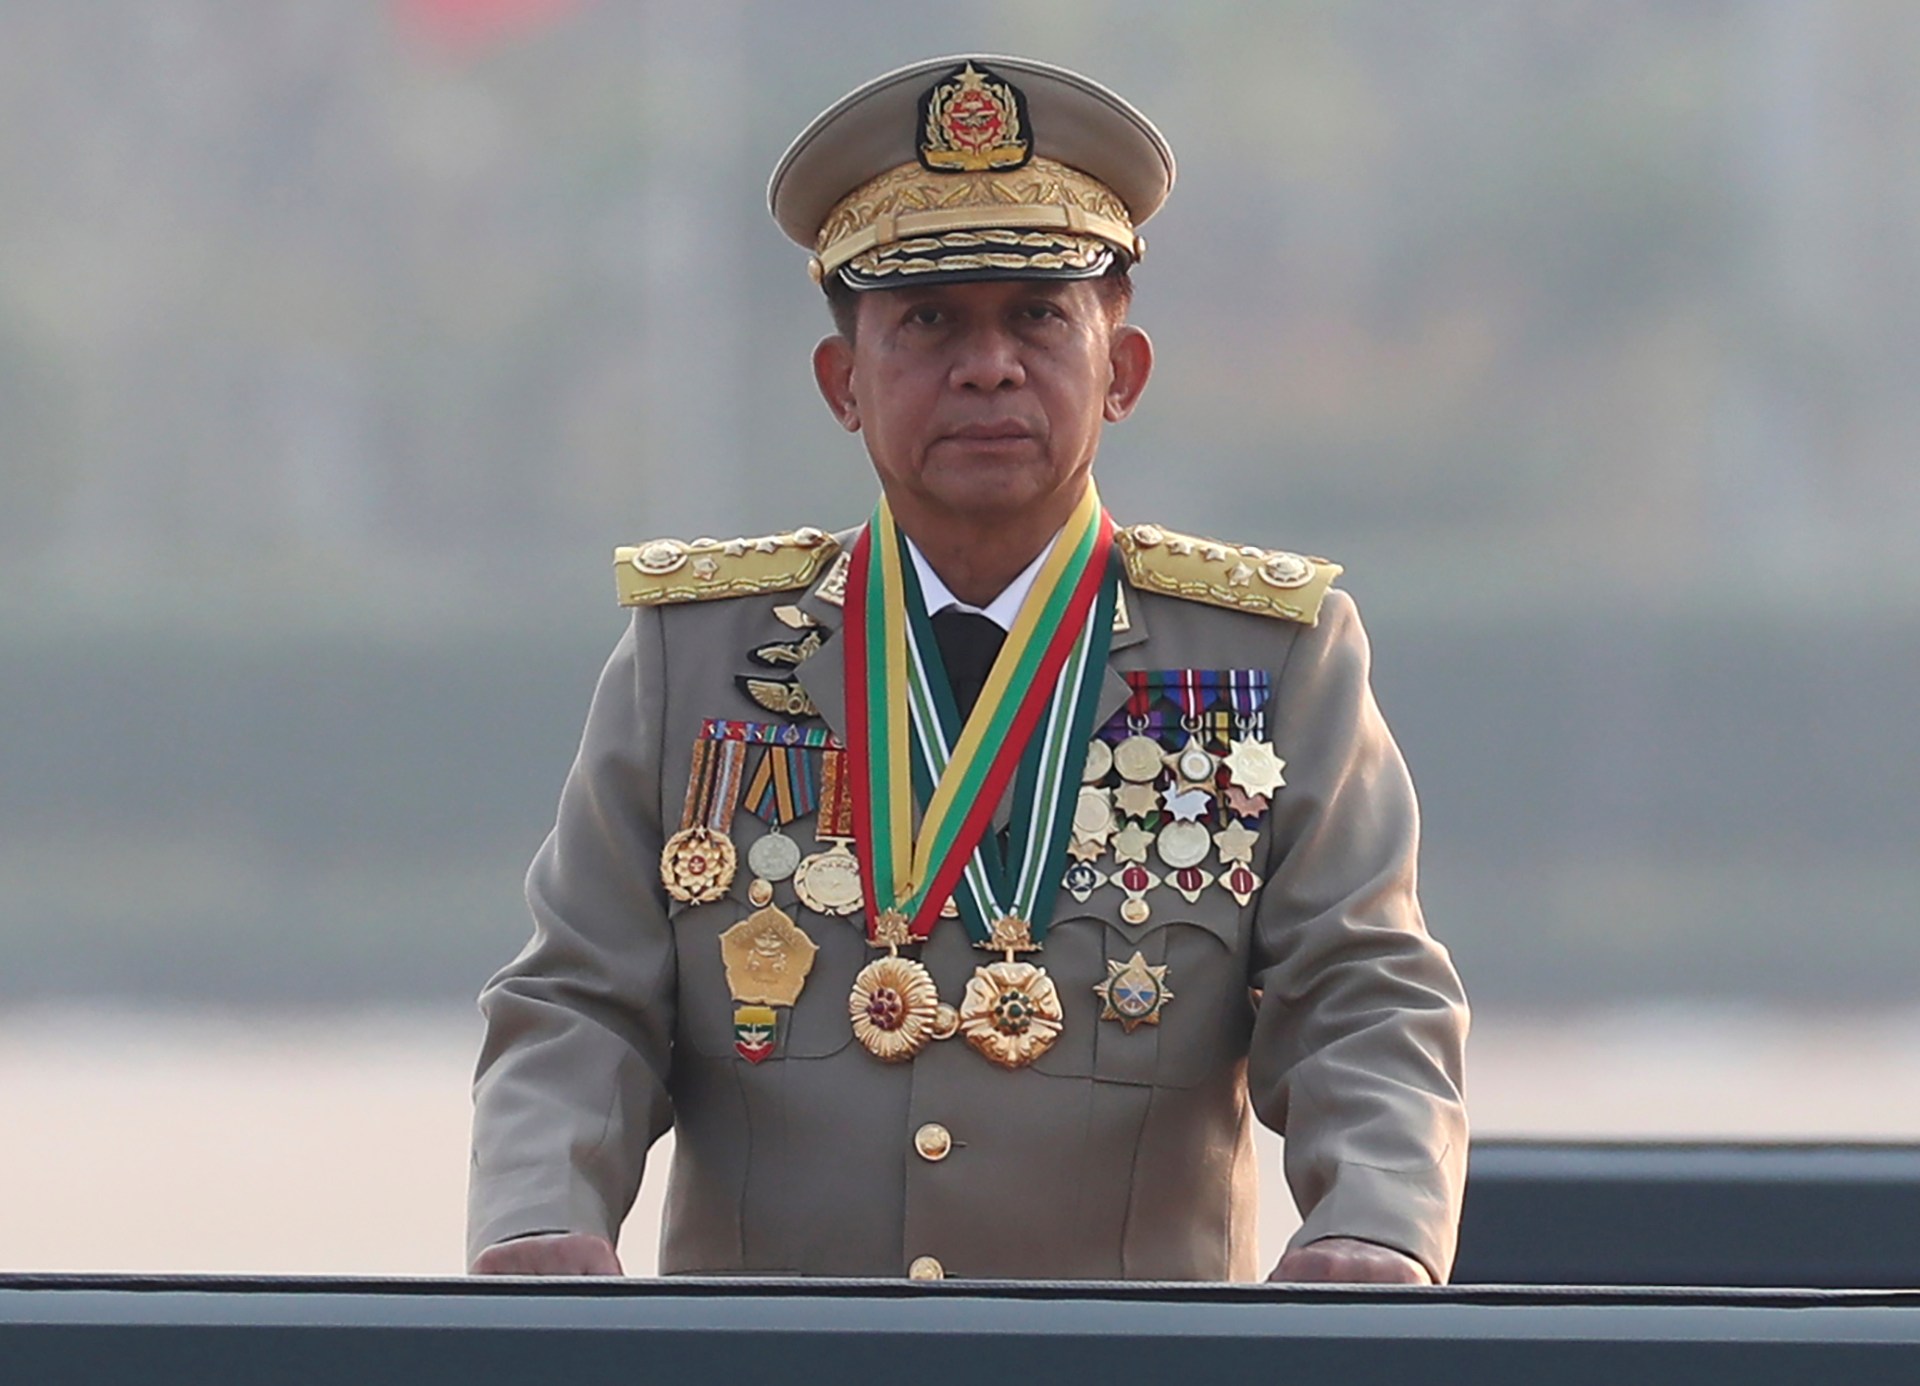 Myanmar’s military chief named acting president | Conflict News